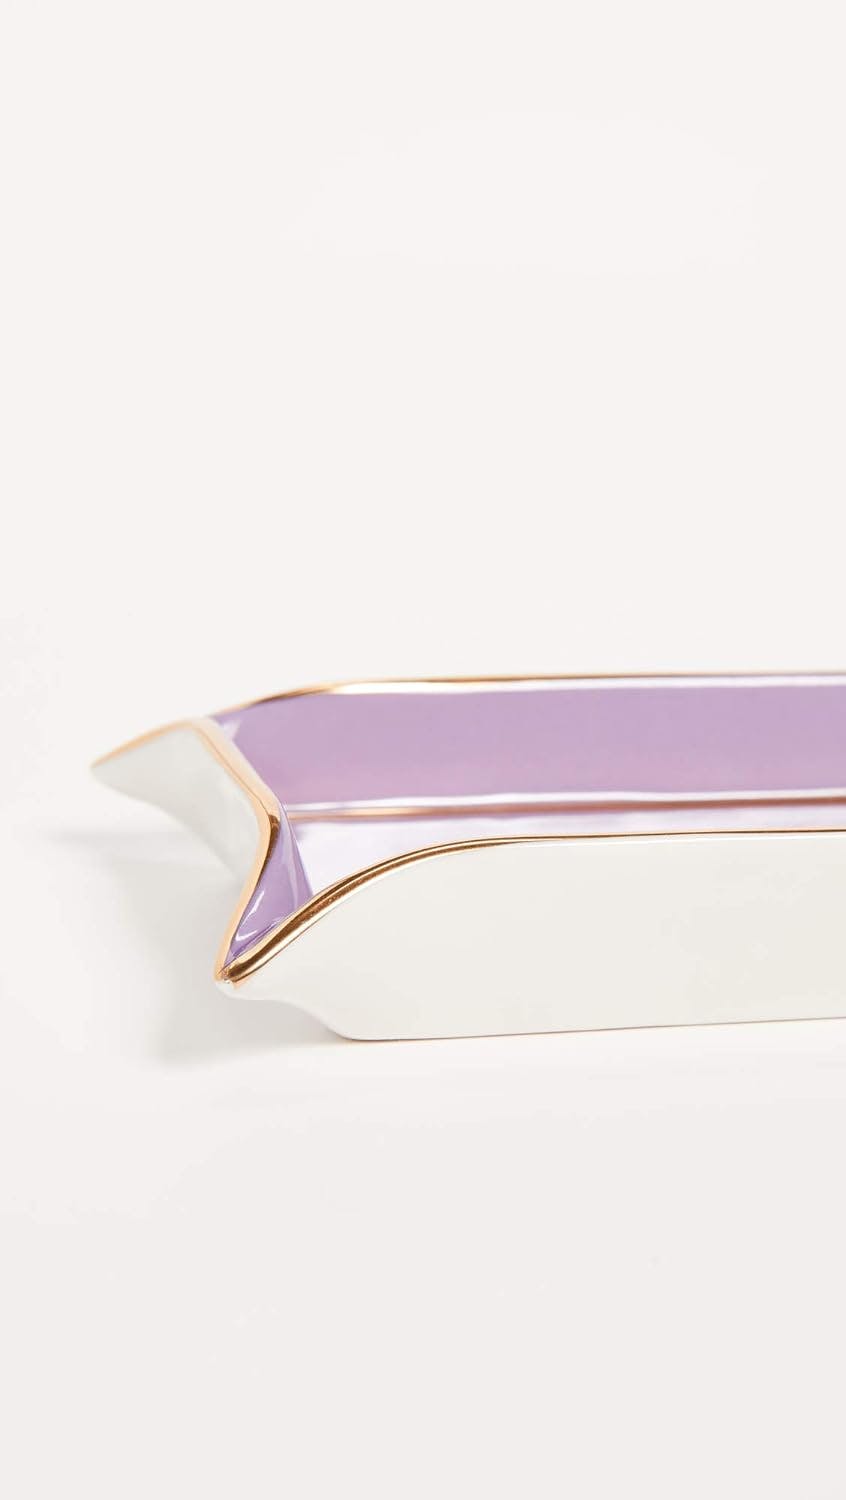 Amethyst Eyes Porcelain Valet Tray with 24-Karat Gold Accents